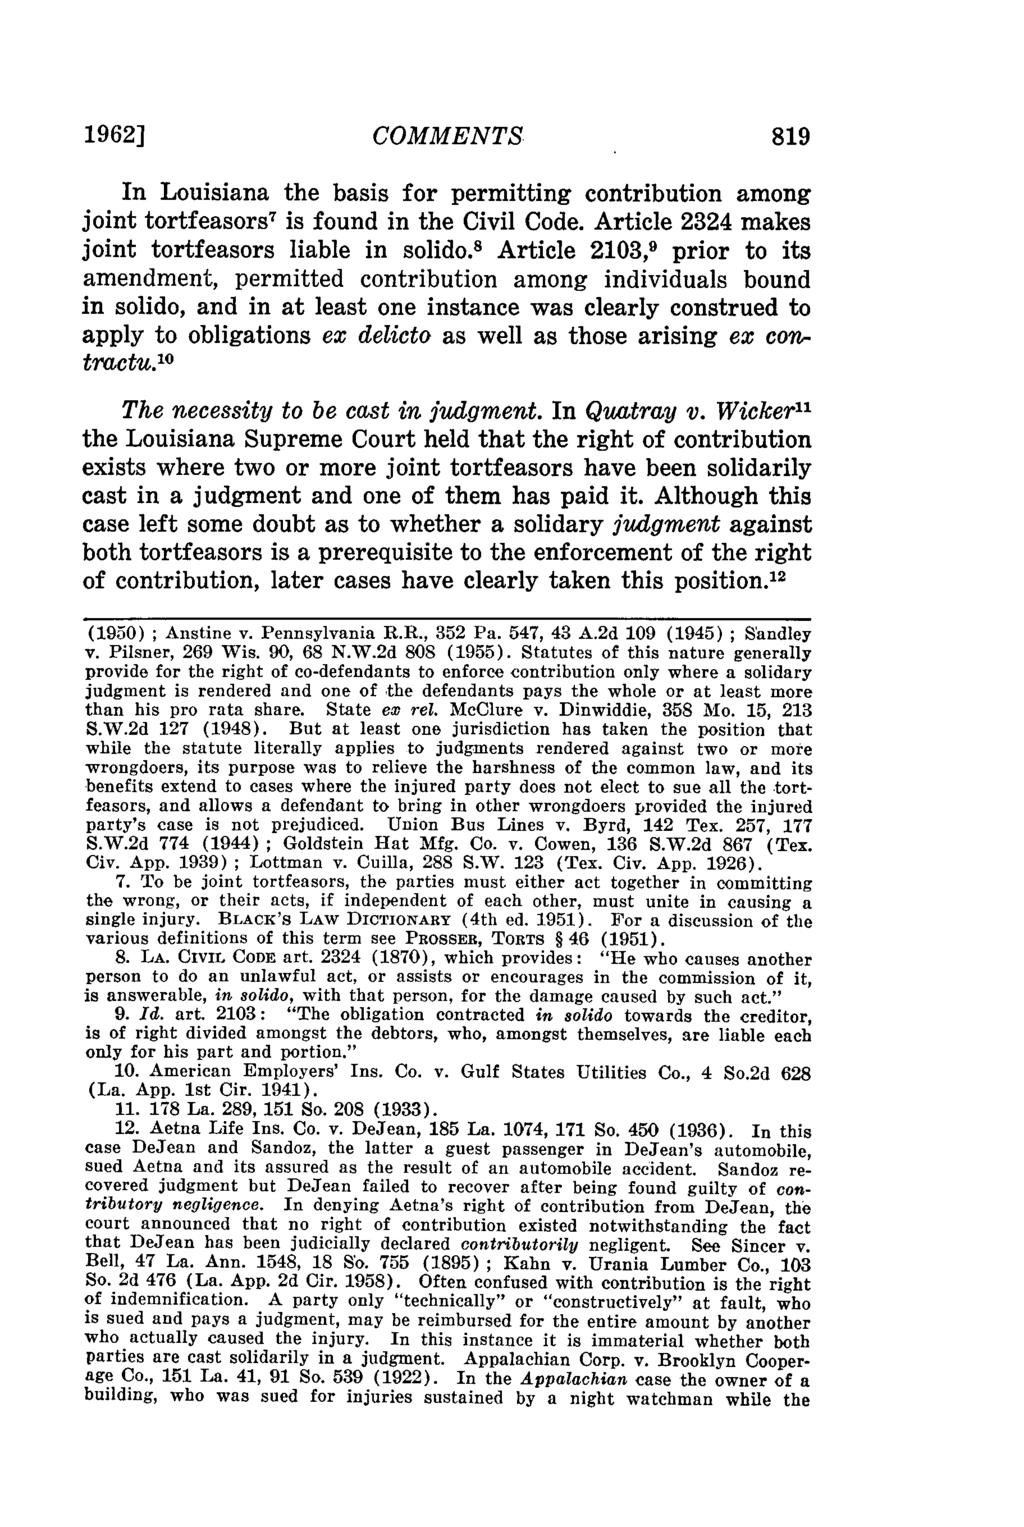 1962] COMMENTS In Louisiana the basis for permitting contribution among joint tortfeasors 7 is found in the Civil Code. Article 2324 makes joint tortfeasors liable in solido.